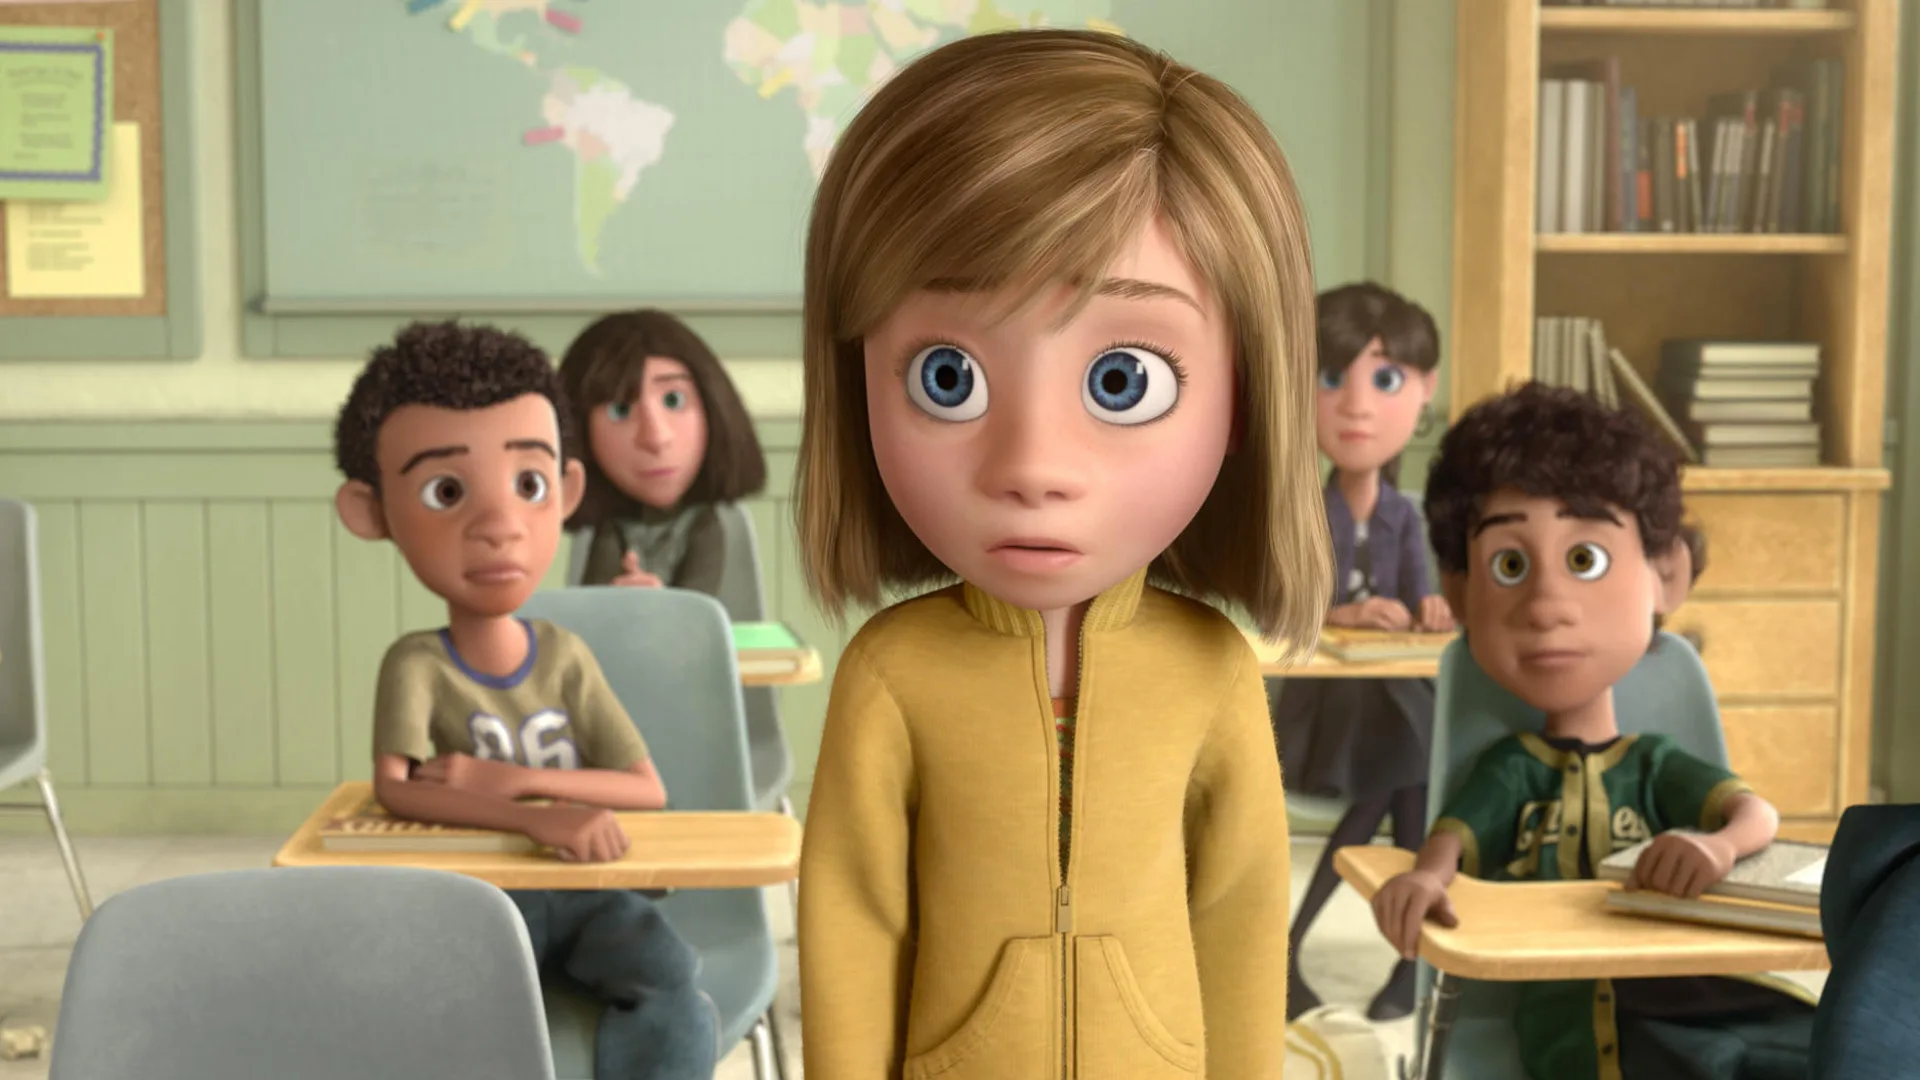 A scene from the Disney/Pixar film Inside Out showing Riley stood up in class with her classmates looking at her from behind